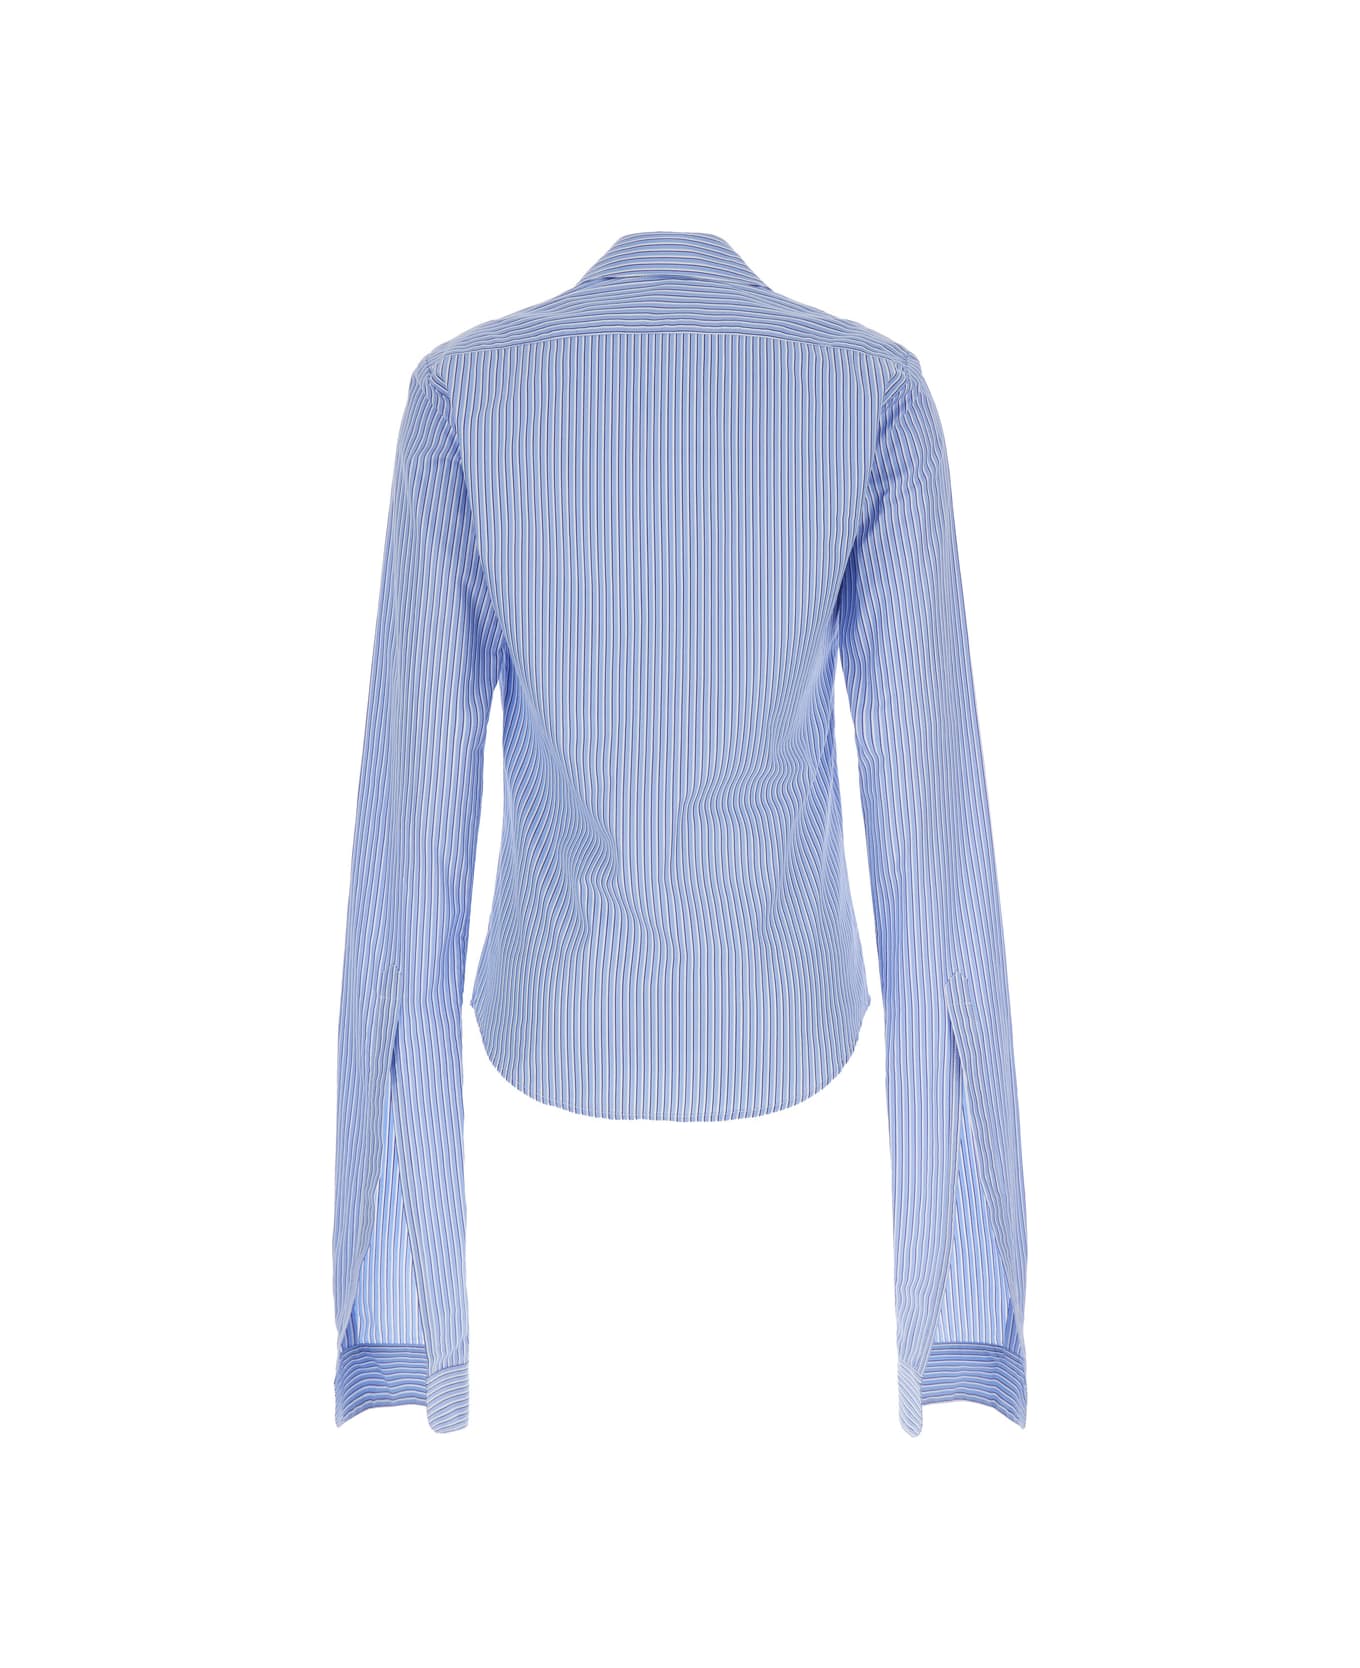 Coperni White And Light Blue Shirt With Knotted Cuffs In Cotton Woman - Blu